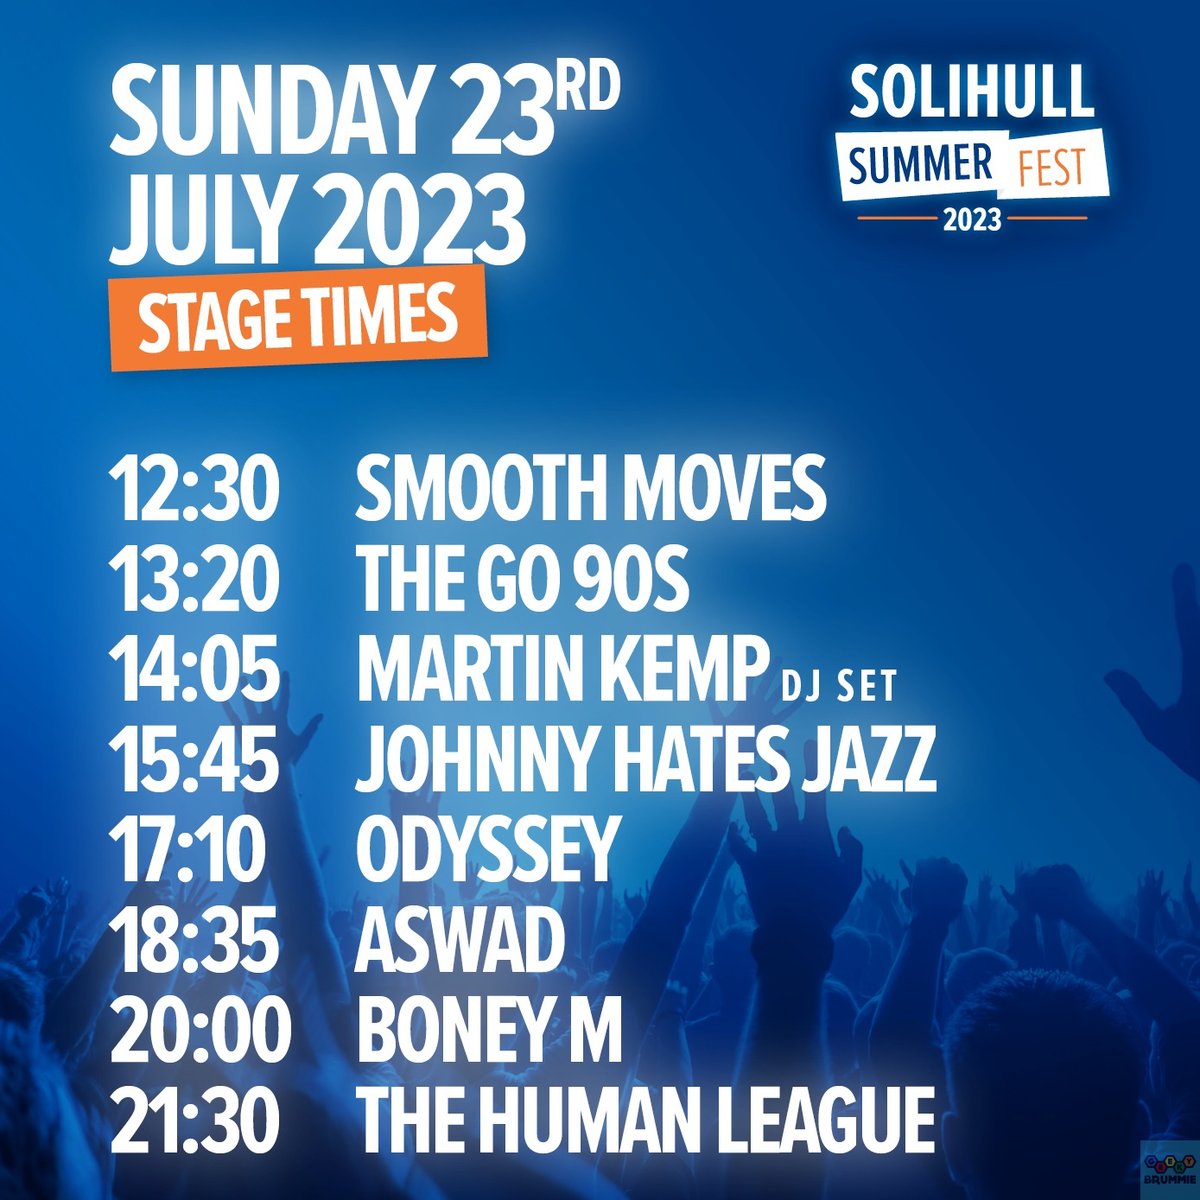 #GeekyGoingsOn @GeekyBrummie Sat 22 & Sun 23 July @summersolihull - Saturday line-up includes @lisajstansfield @kennythomas_uk @artfuldodgermc @sophieEB - Sunday line-up includes @JHJ_official @humanleaguehq @realmartinkemp @therealaswad rb.gy/odp55